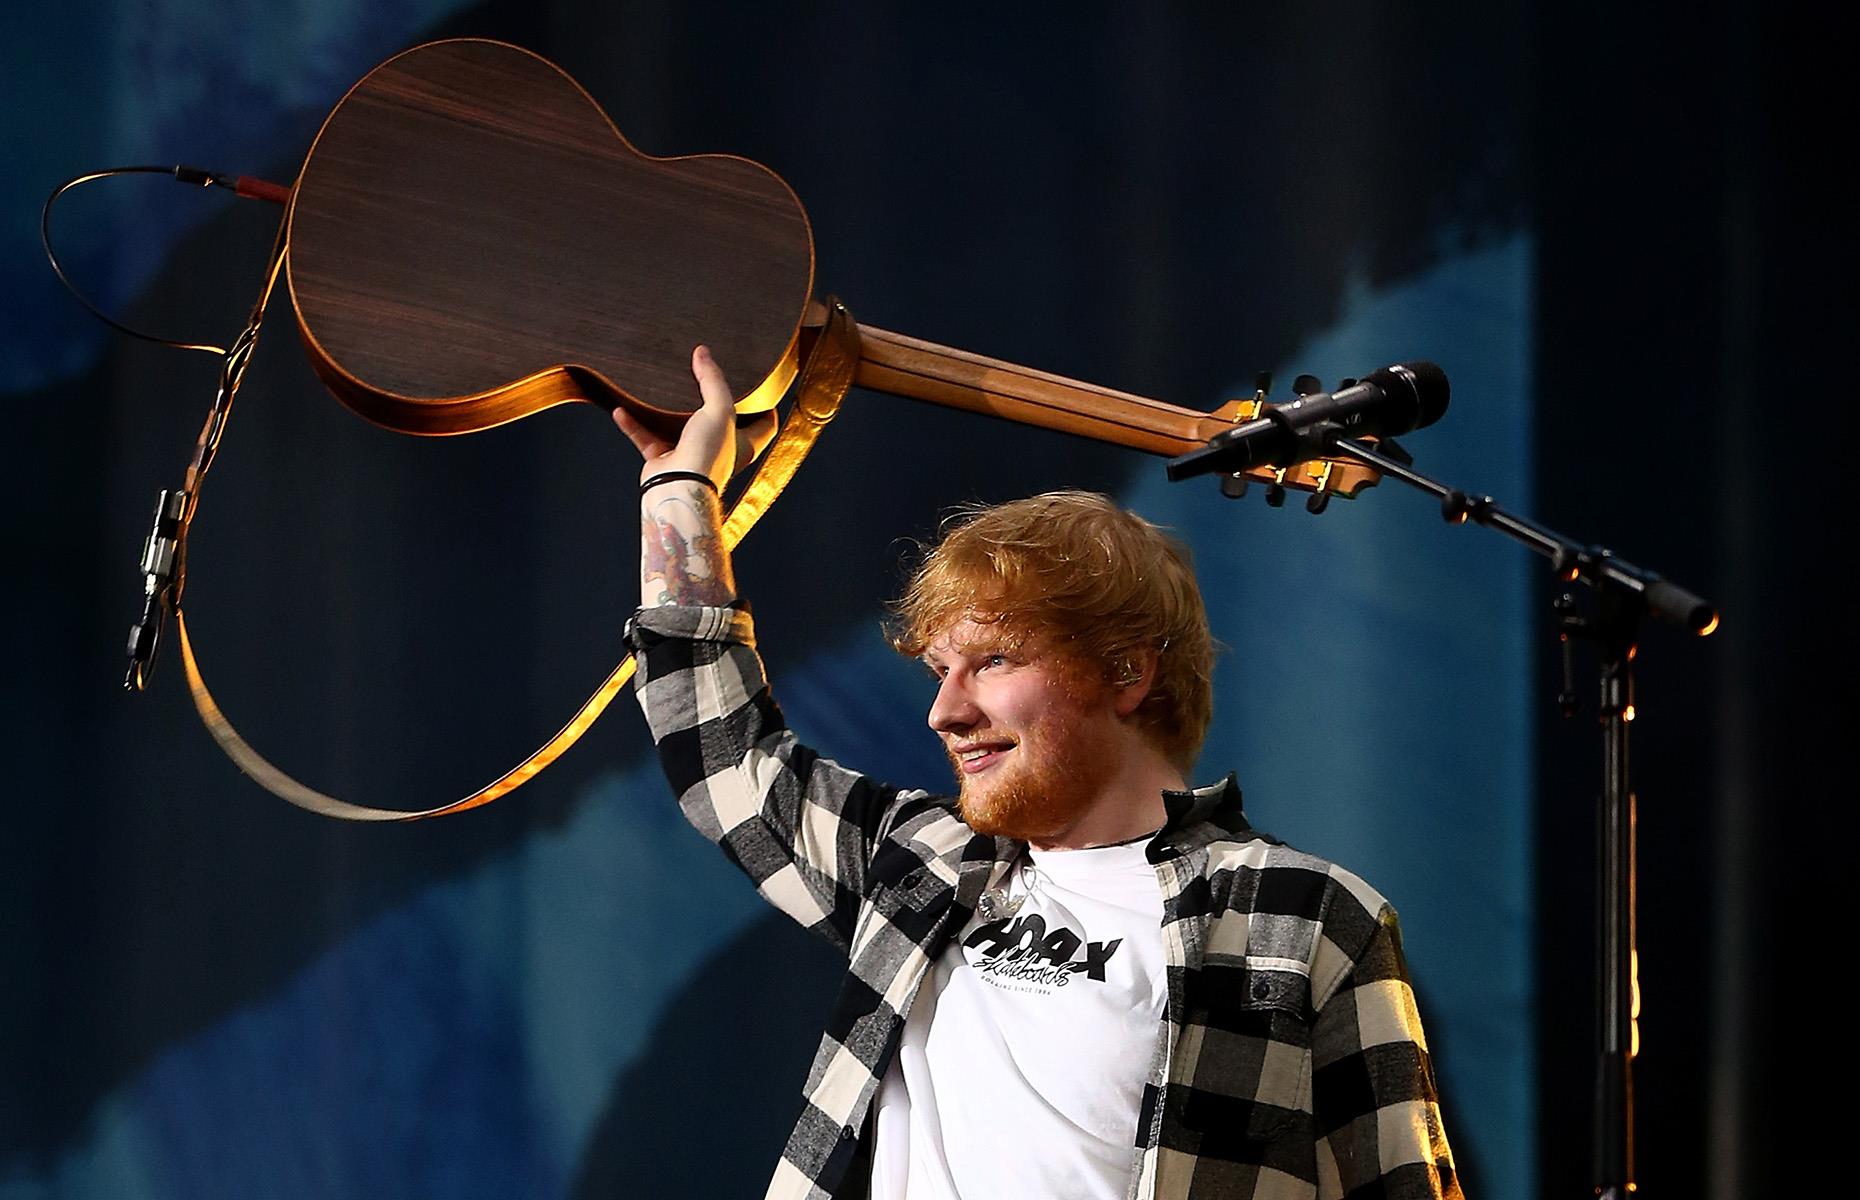 <p>Next up, we have Ed Sheeran's <em>÷ Tour</em>, pronounced "the Divide Tour," which ran between 2017 and 2019. The British singer-songwriter sold an incredible 8.9 million tickets and played an epic 260 shows across six continents.  </p>  <p>An astonishing success, the tour grossed $776 million, which is a phenomenal $962 million in today's money. During his juggernaut trek around the globe, Sheeran made history as the first artist to perform solo at London's iconic Wembley Stadium for four consecutive, sold-out nights in June 2018.</p>